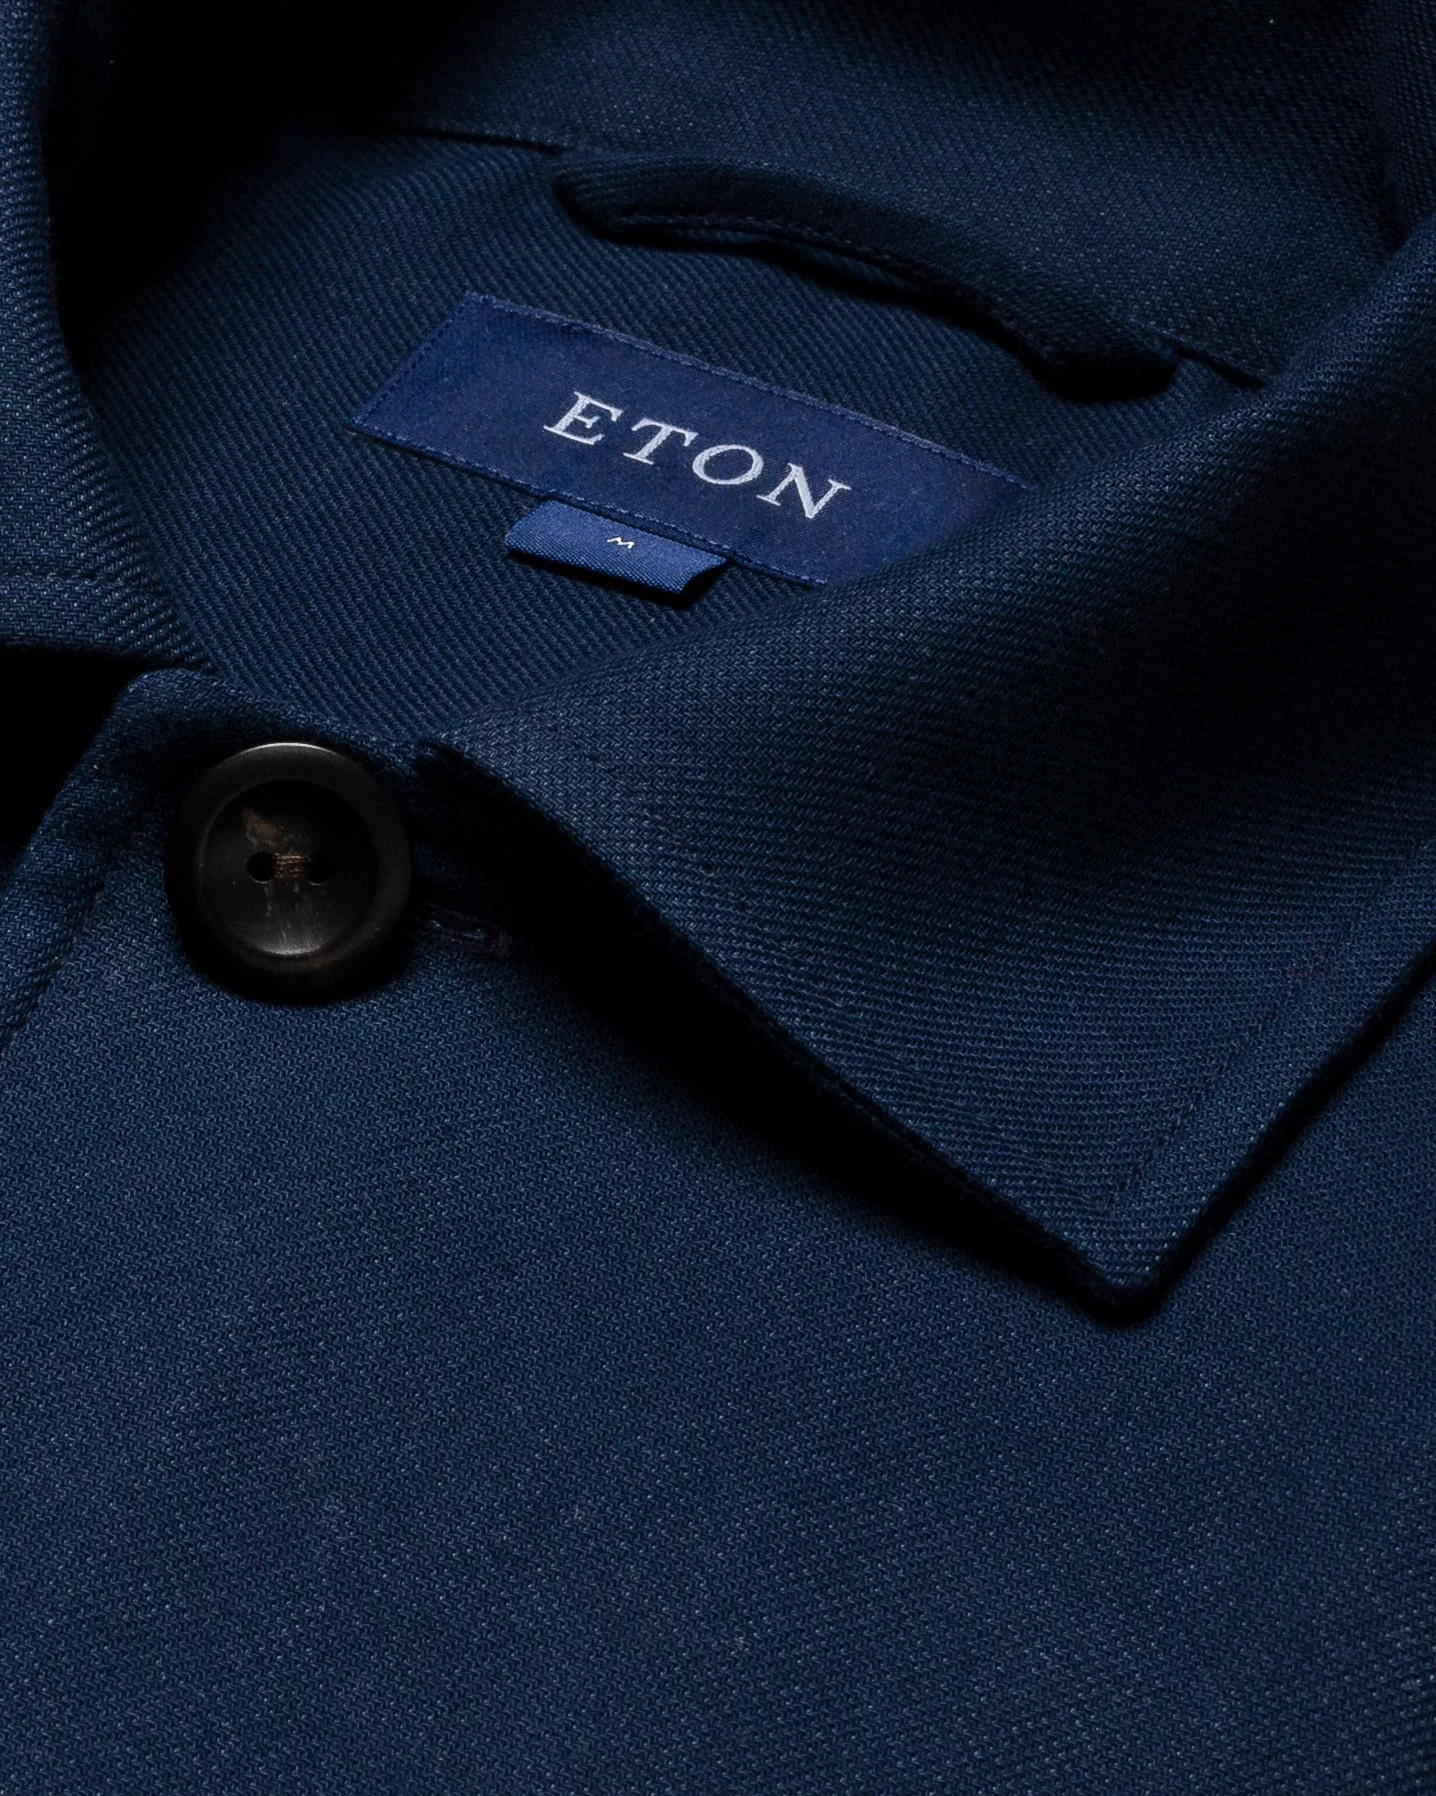 Eton - navy blue twill collar with no collarstand double round with piping regular